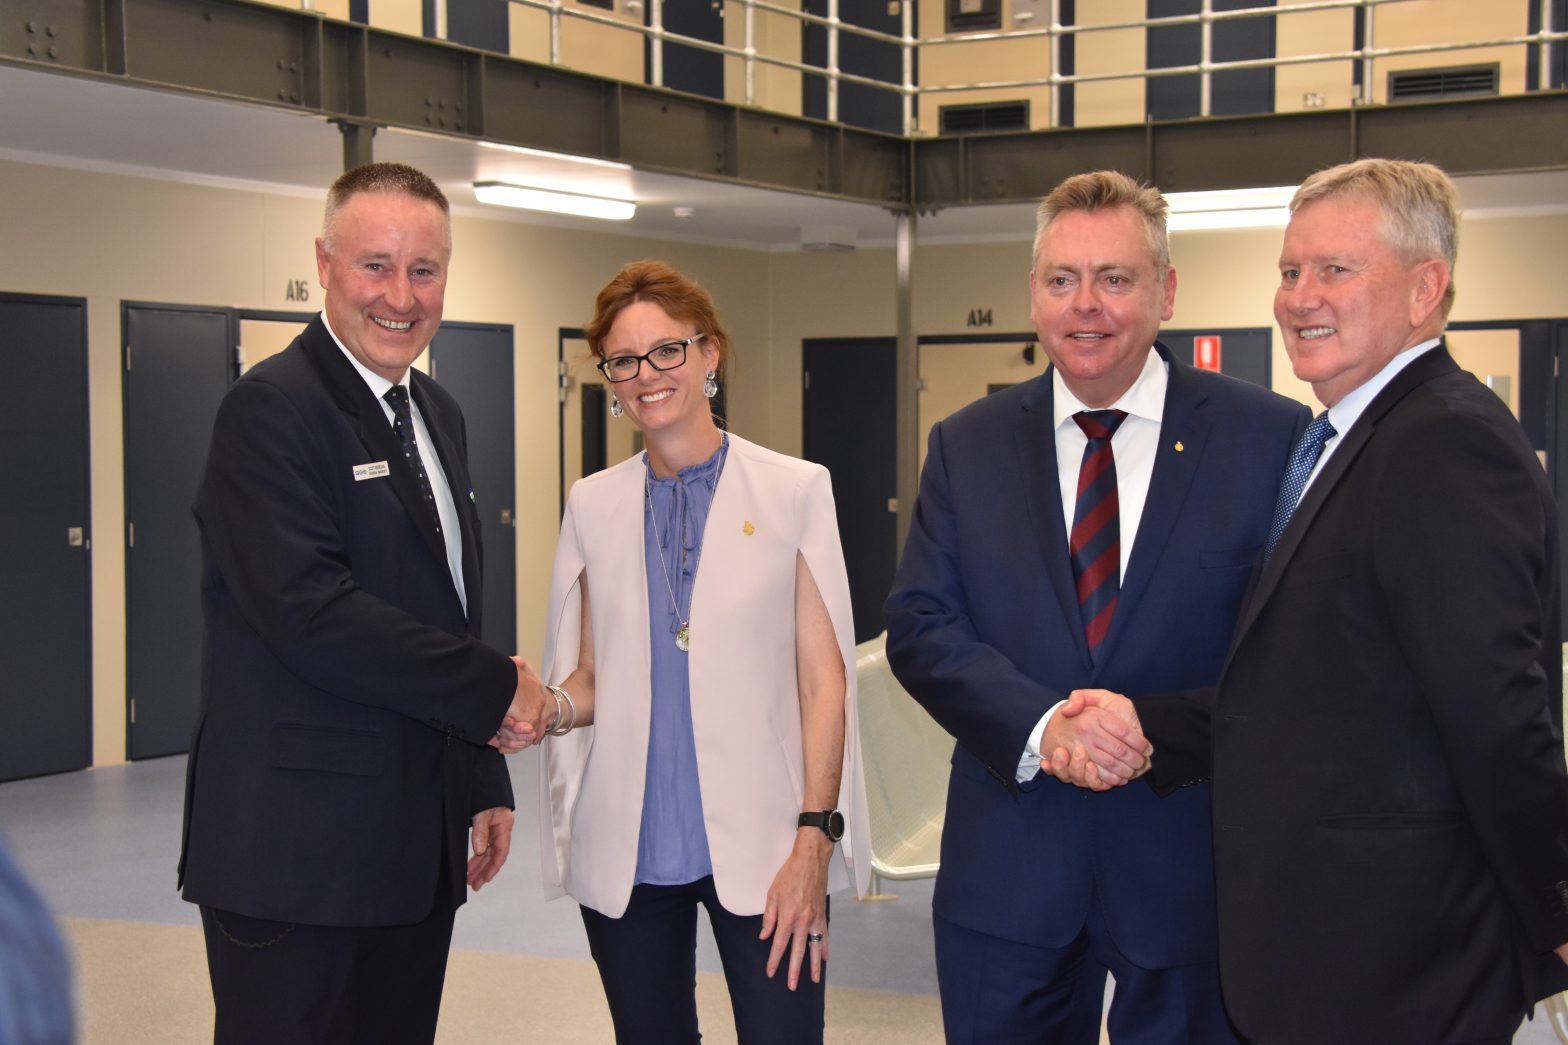 Congratulations all round from Scott Brideoak, General Manager of Junee Correctional Centre; Member for Cootamundra Steph Cooke; The Hon. Anthony Roberts, Minister for Counter Terrorism and Corrections and Pieter Bezuidenhout, Managing Director, The GEO Group Australia